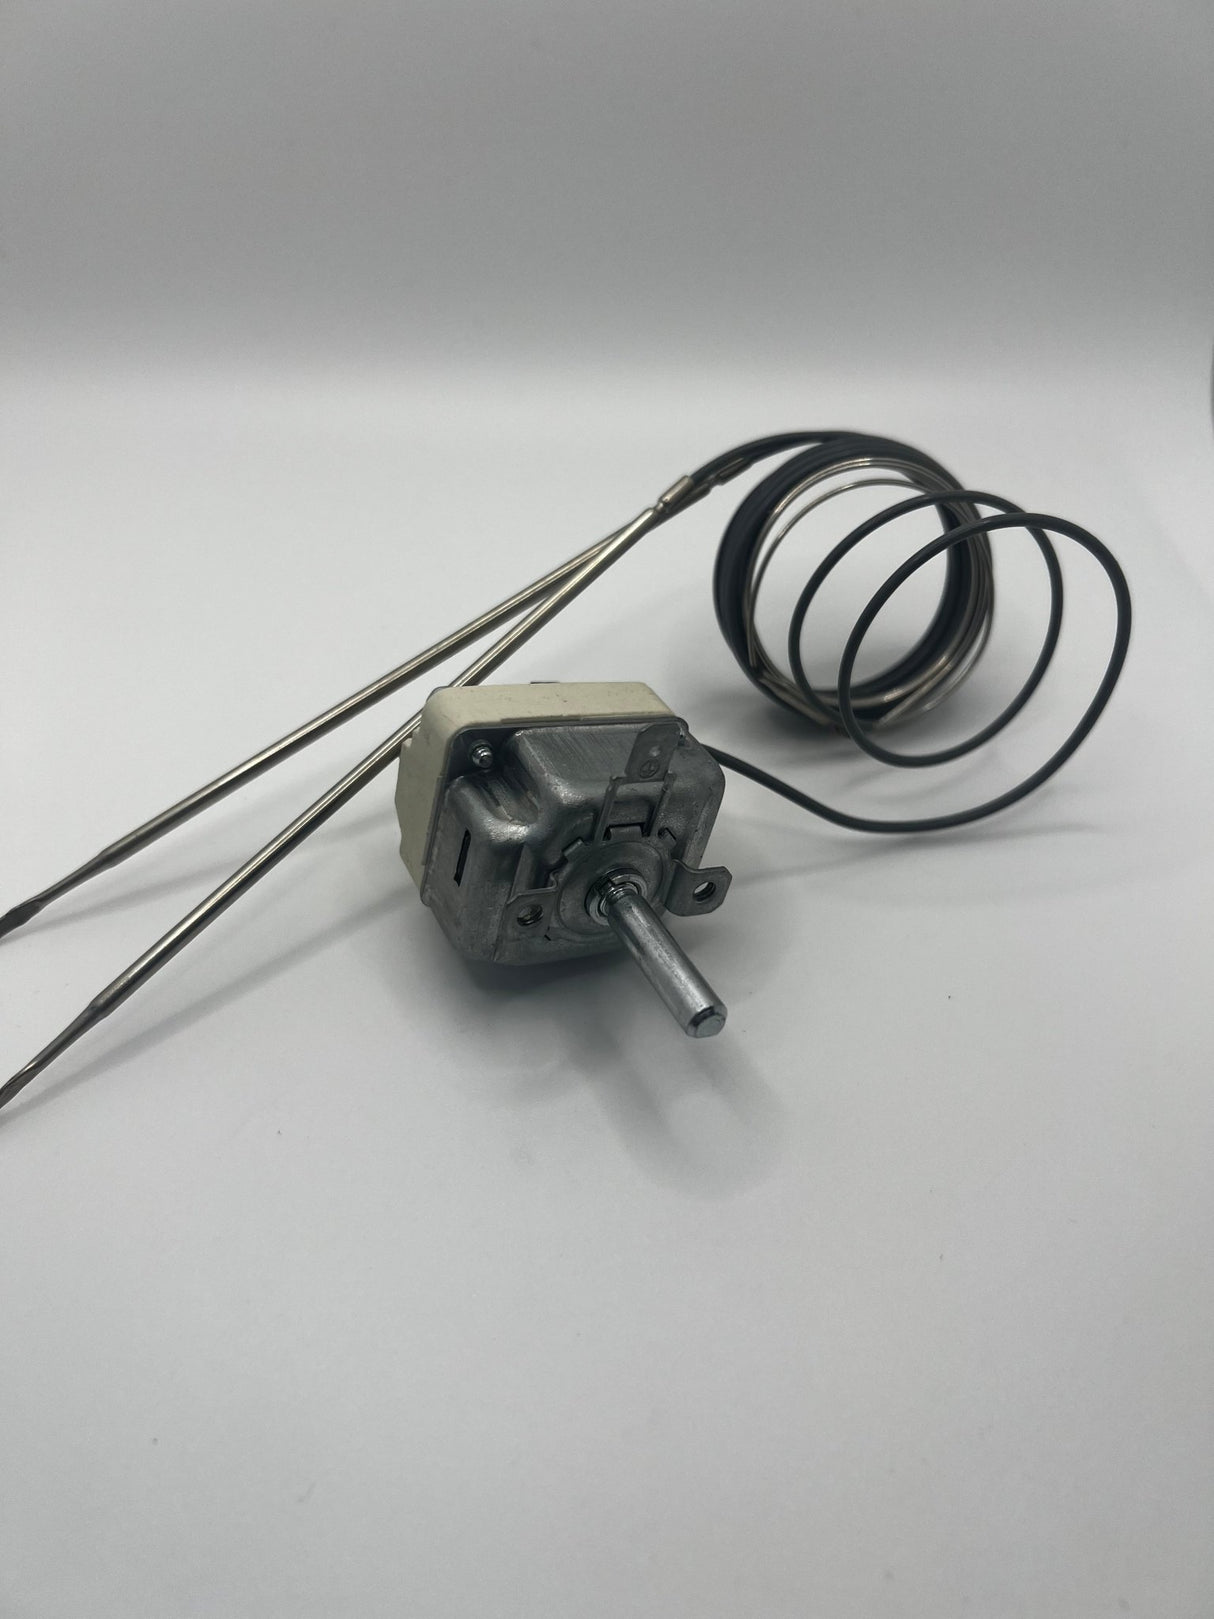 Ilve Oven Dual Sensor Thermostat 55.19059.810 A/492/06 - My Oven Spares-Ilve-55.19059.810-3